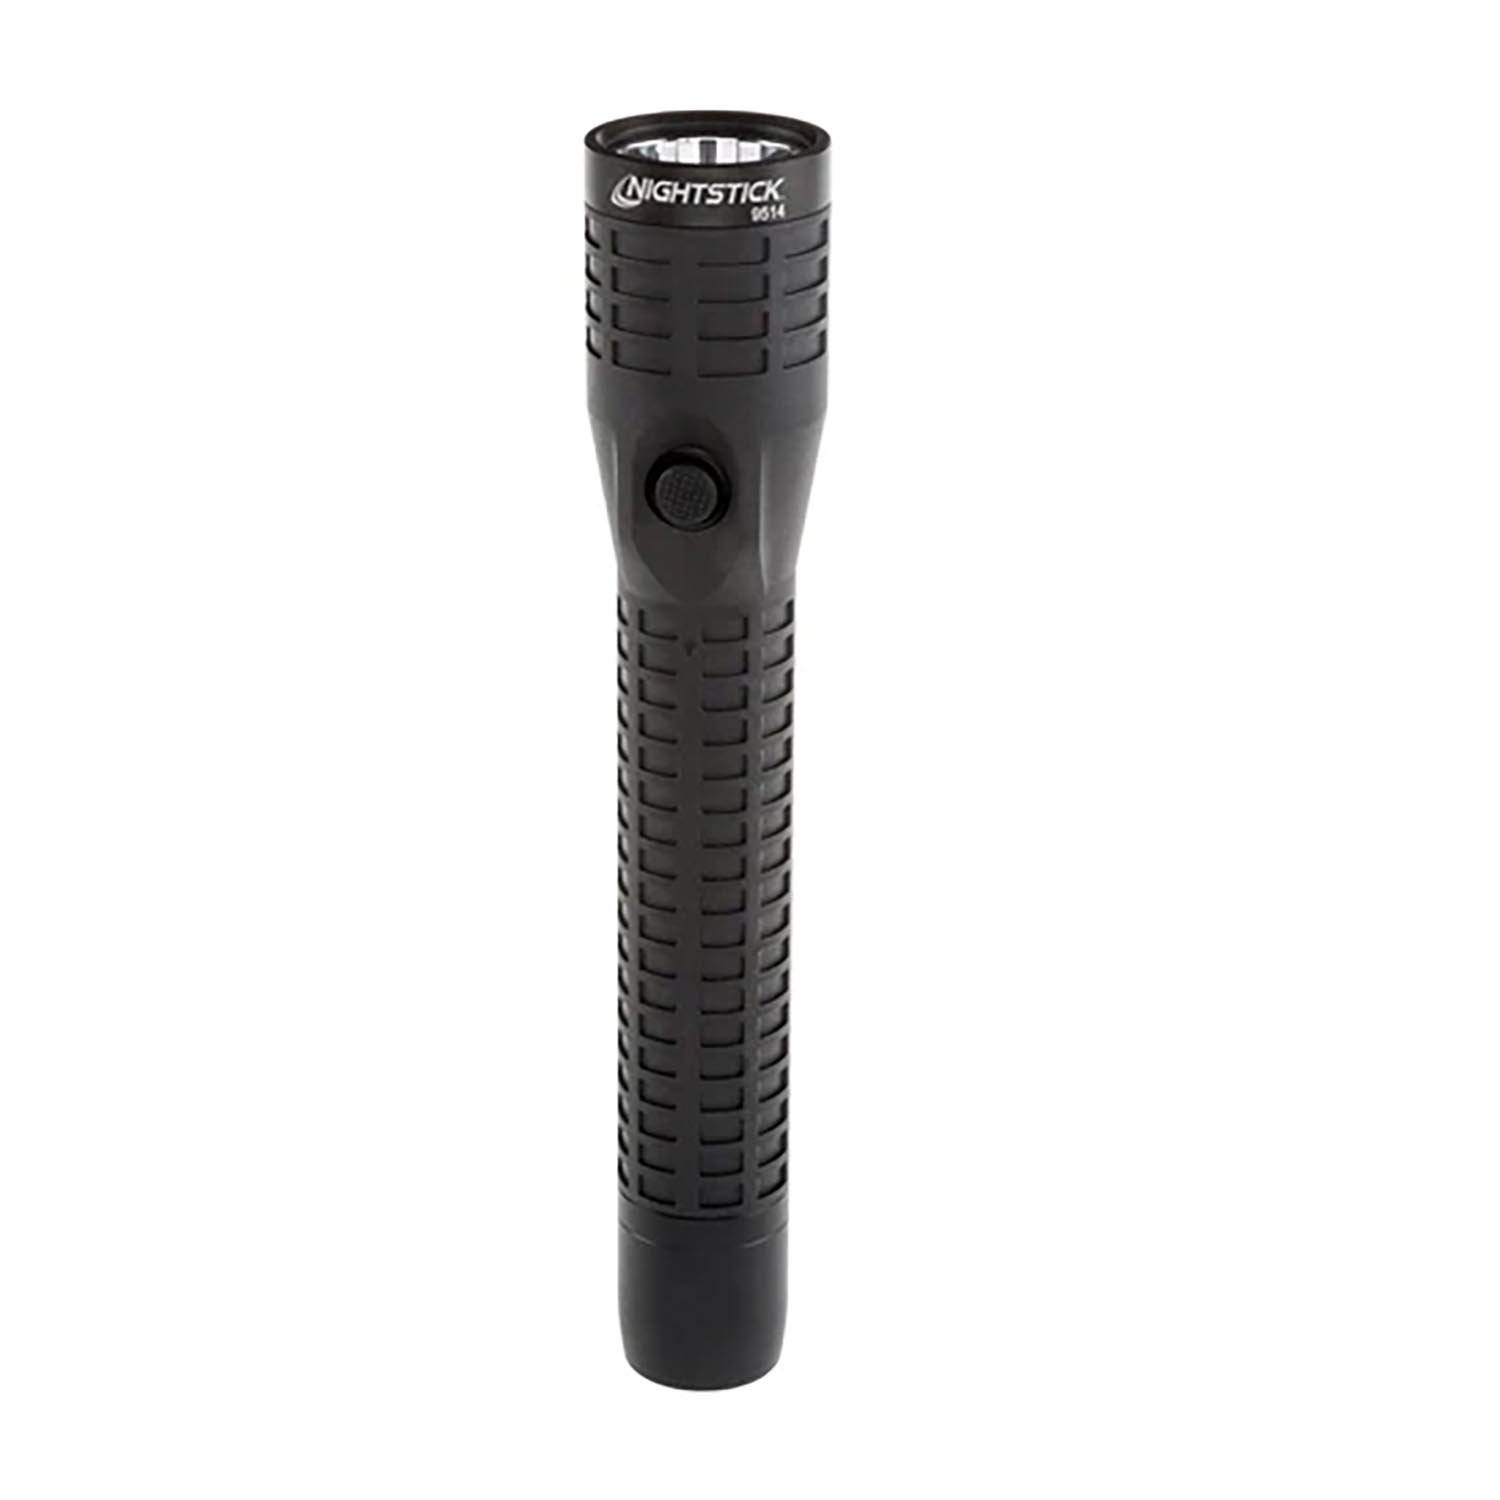 Nightstick Polymer Duty Sized Rechargeable Flashlight